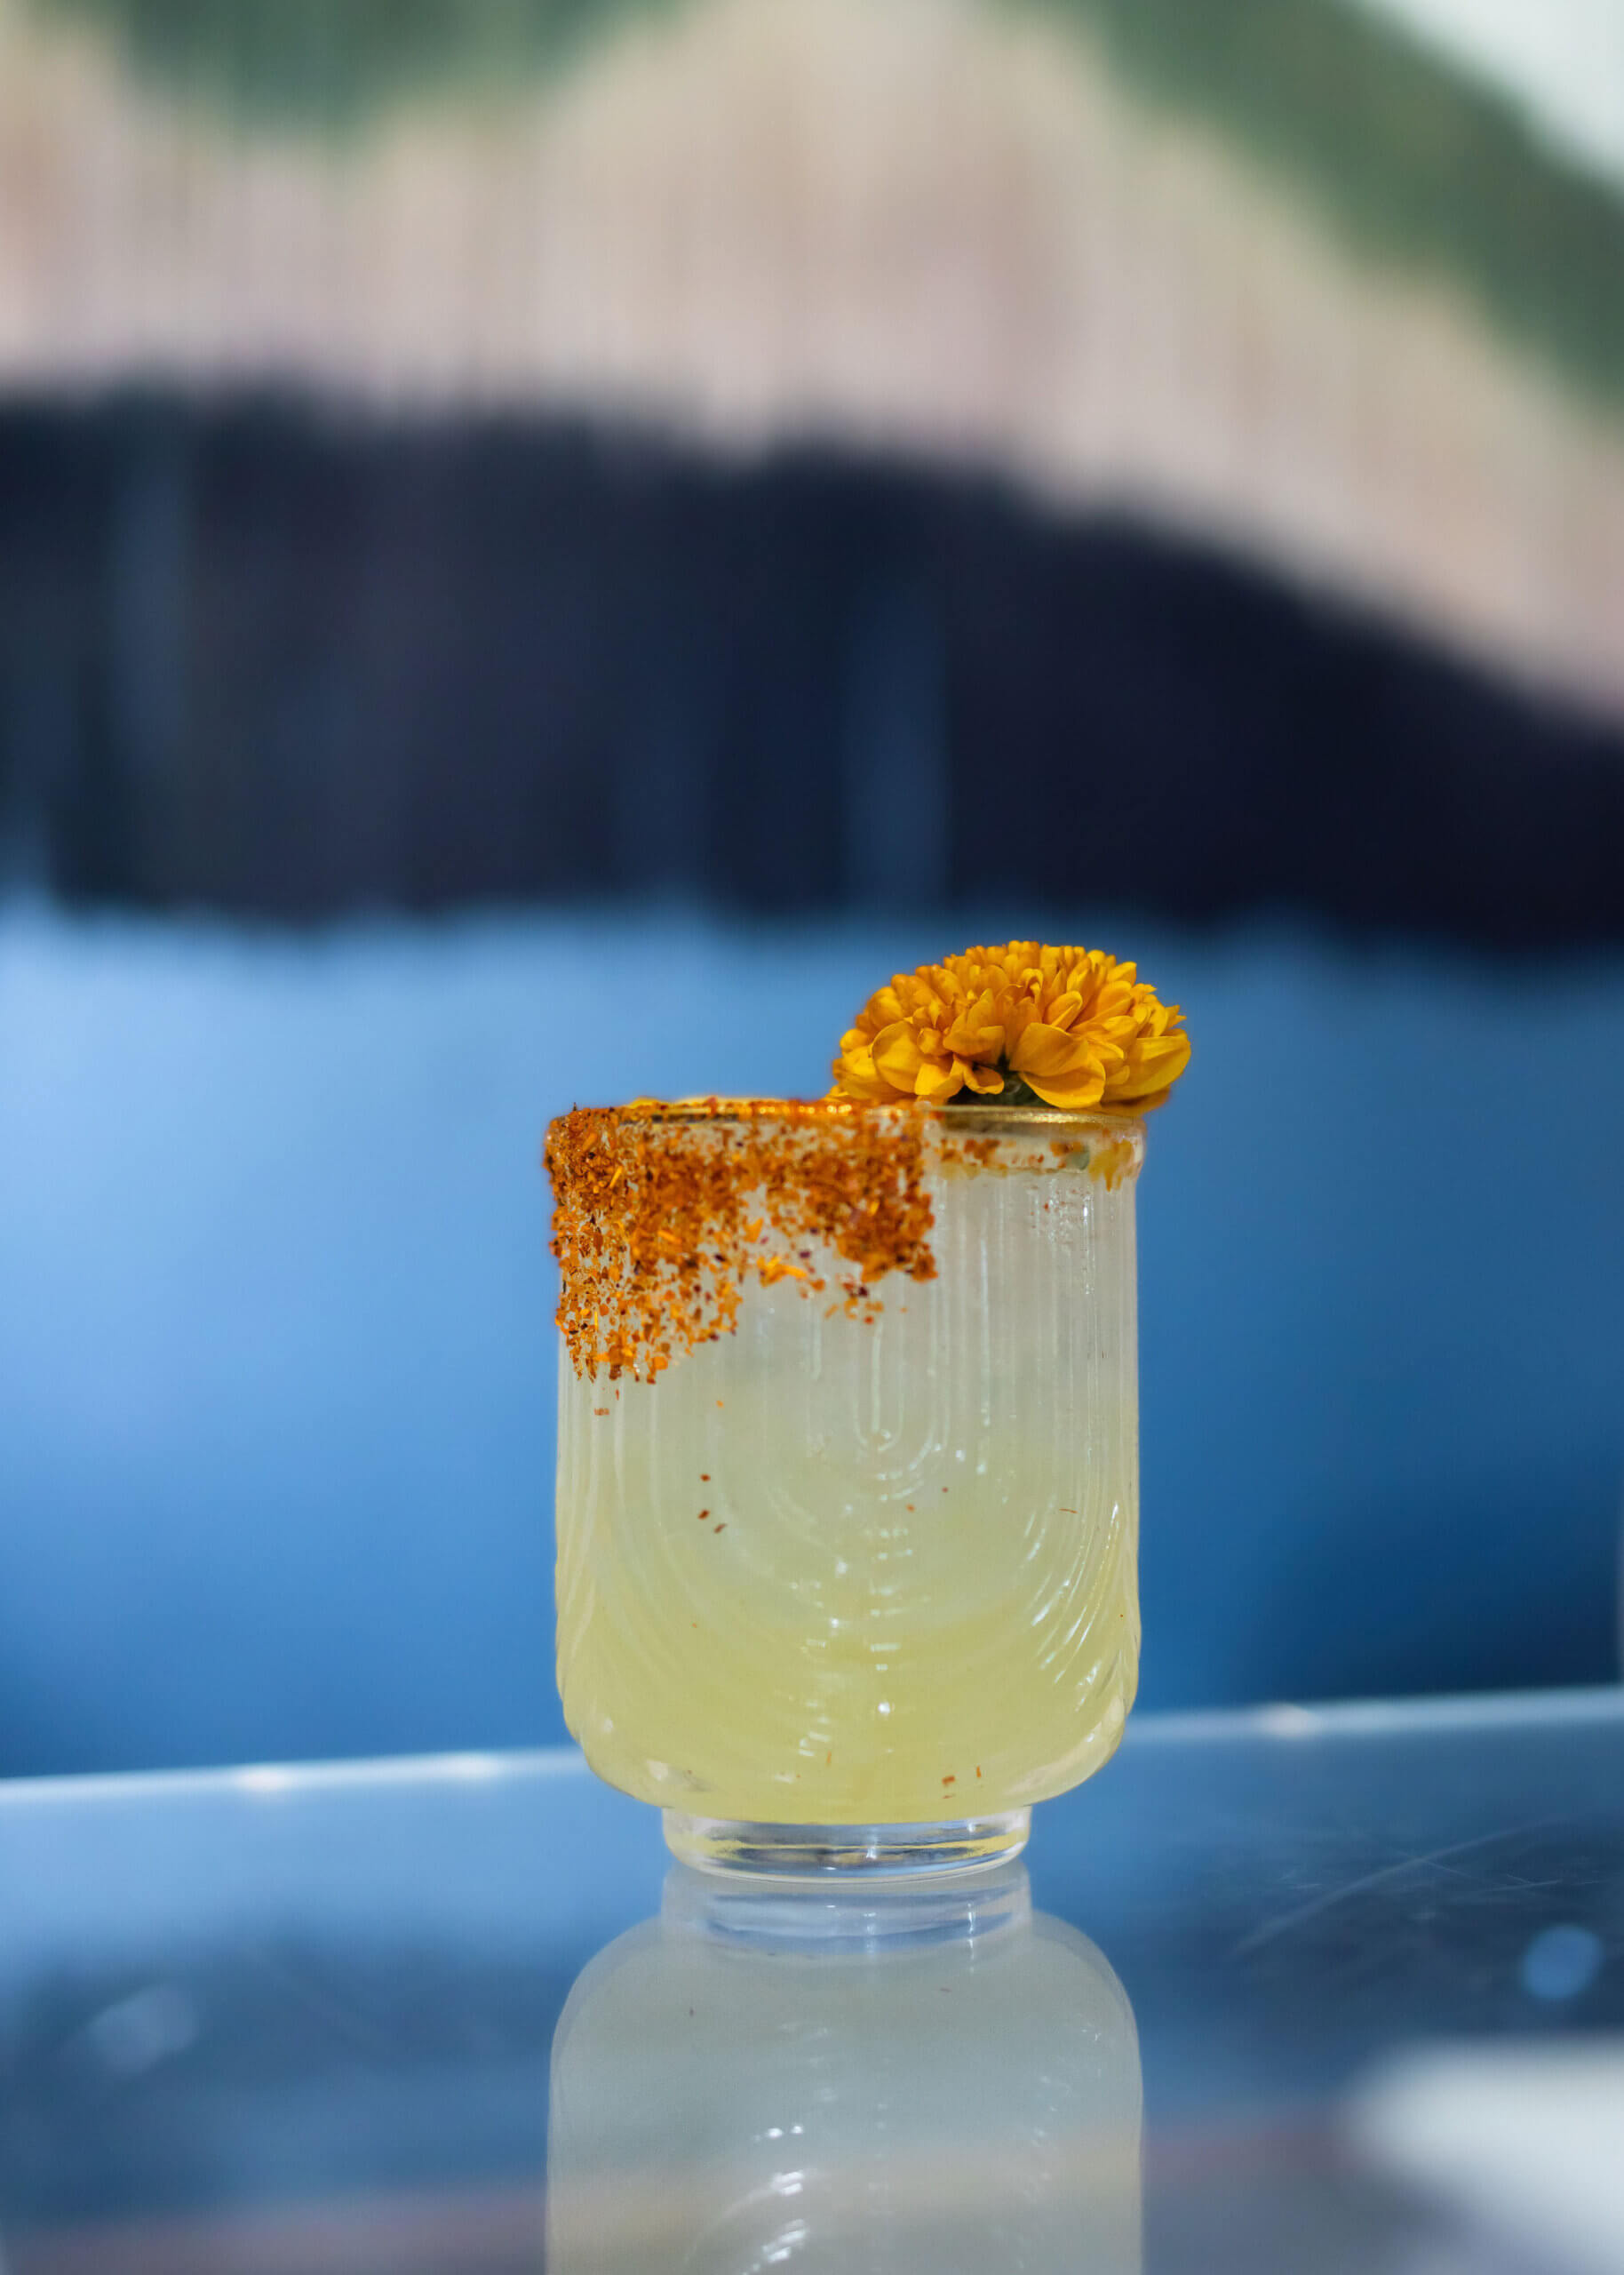 A glass with a yellow liquid inside, spicy salt on the rim and an orange flower on top.  